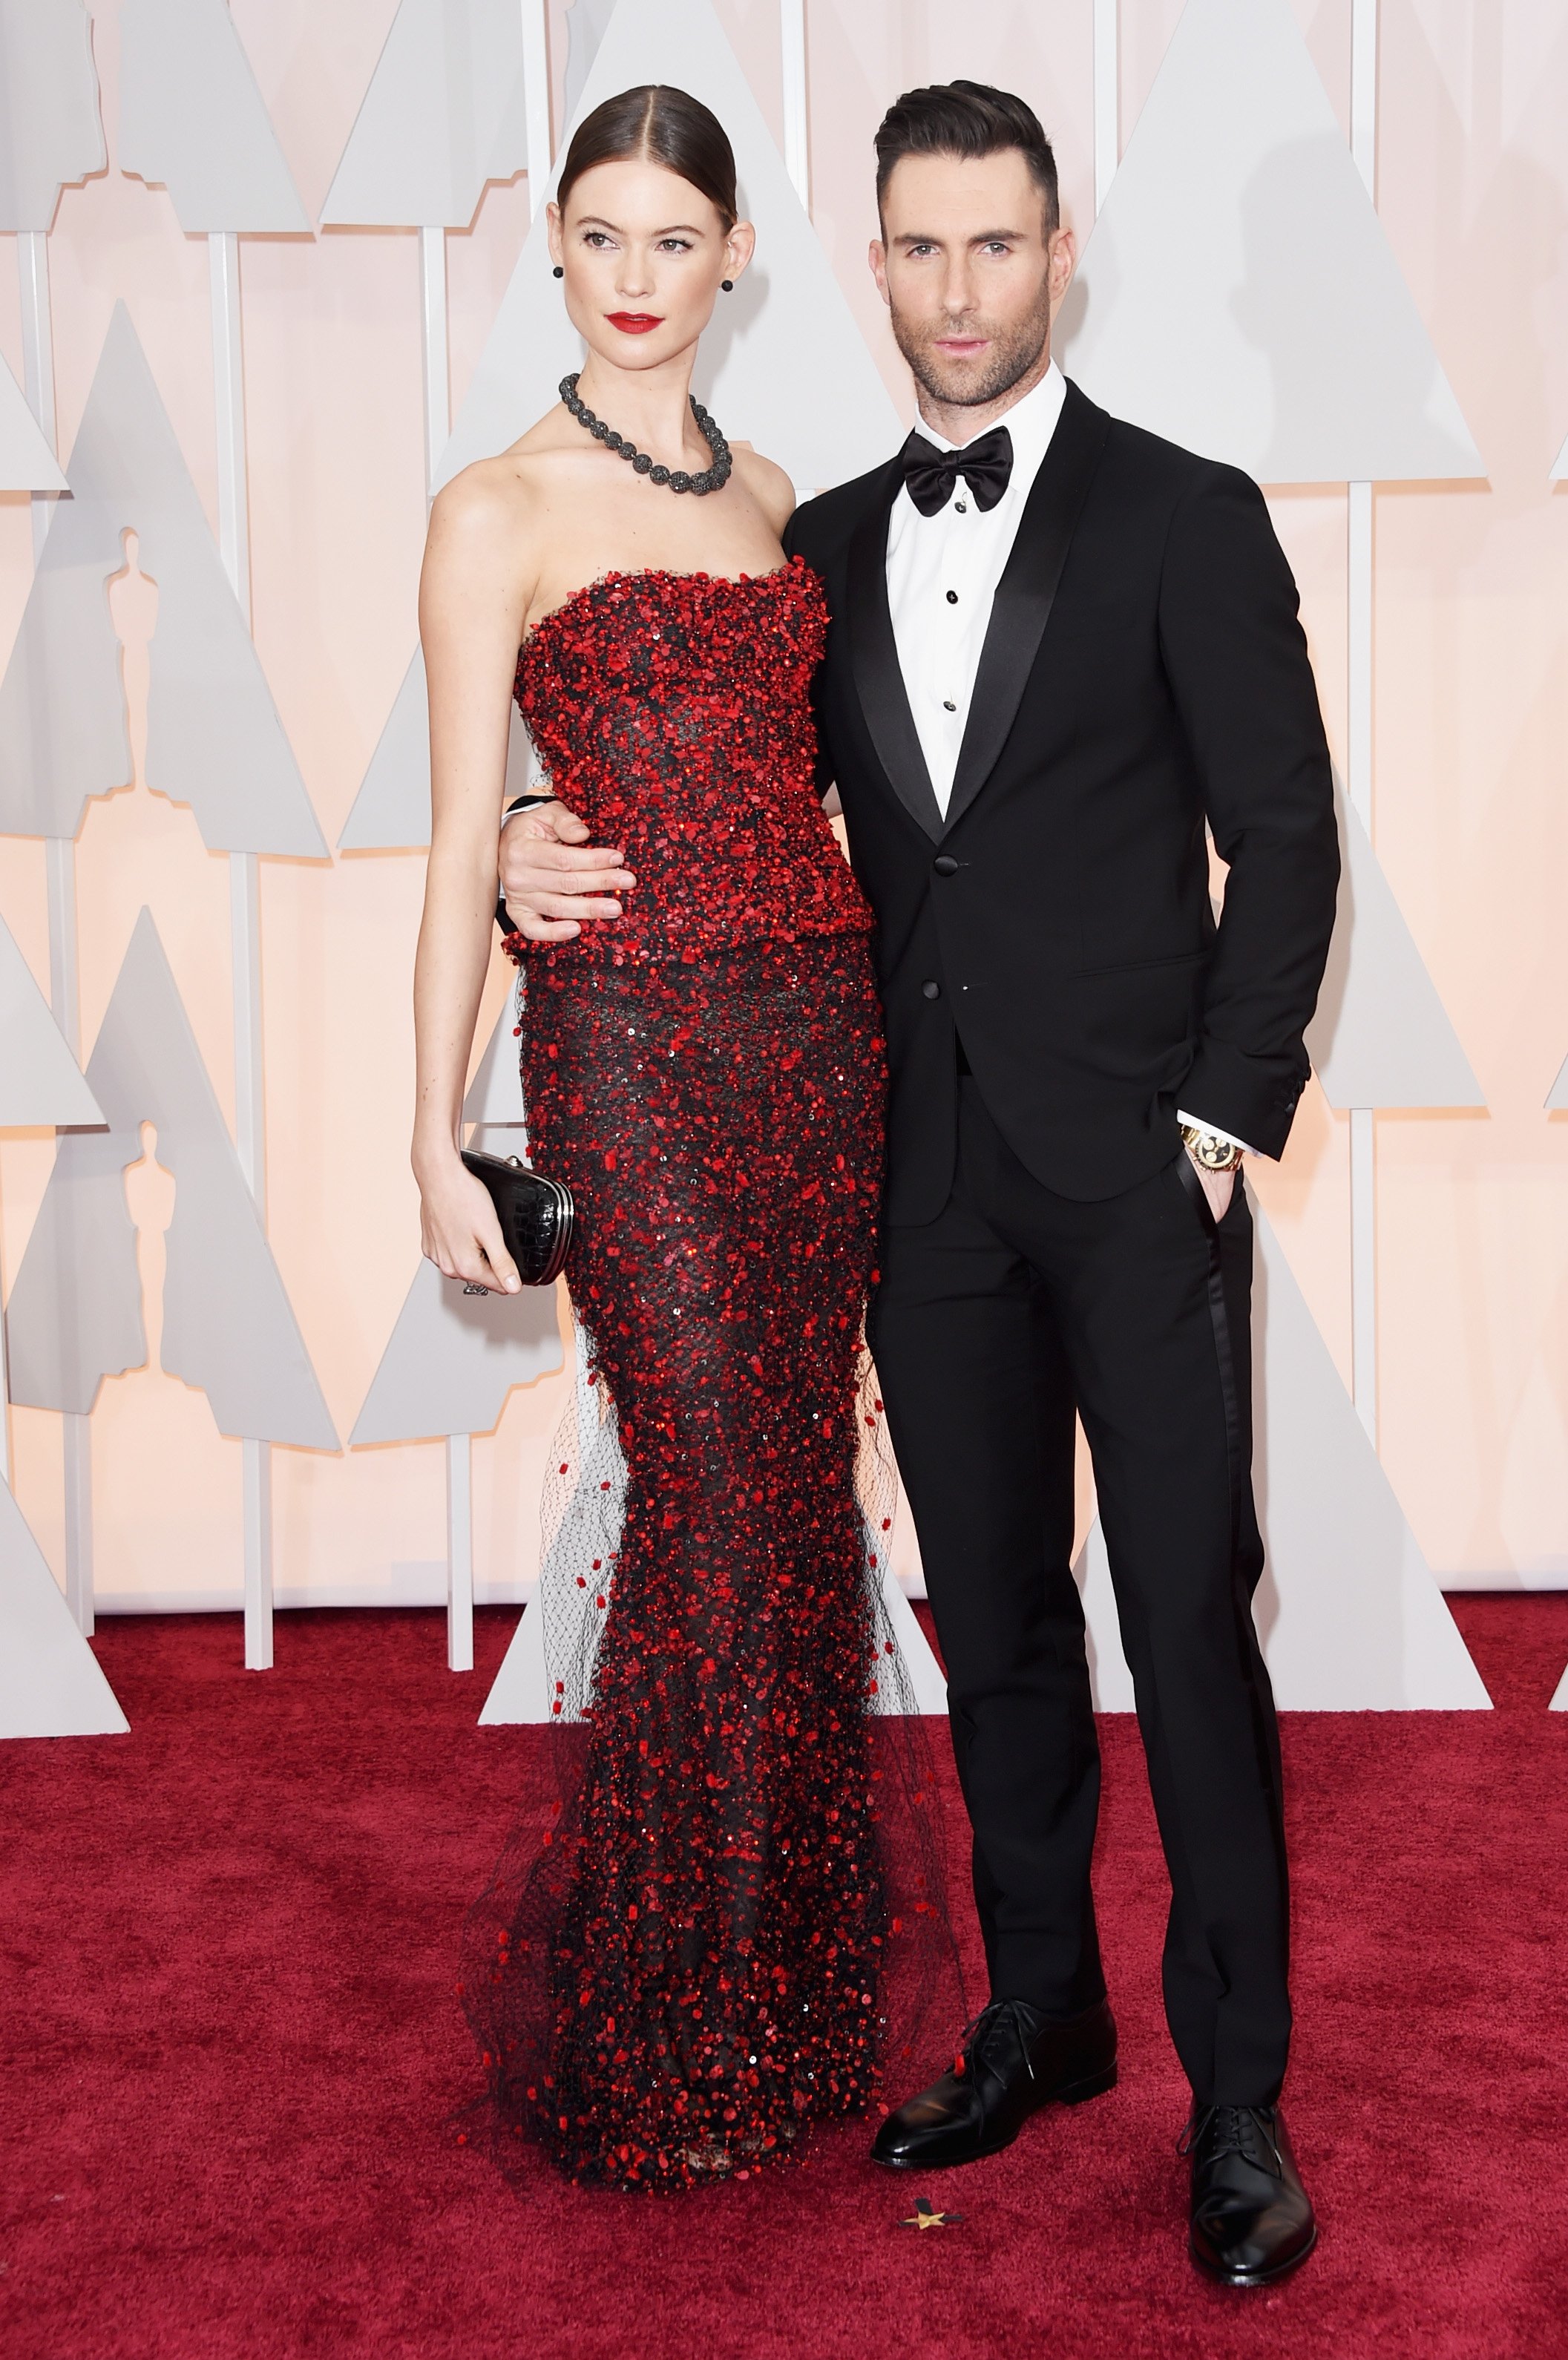 Adam Levine and wife Behati Prinsloo at the 87th Academy Awards in 2015 in Hollywood | Source: Getty Images